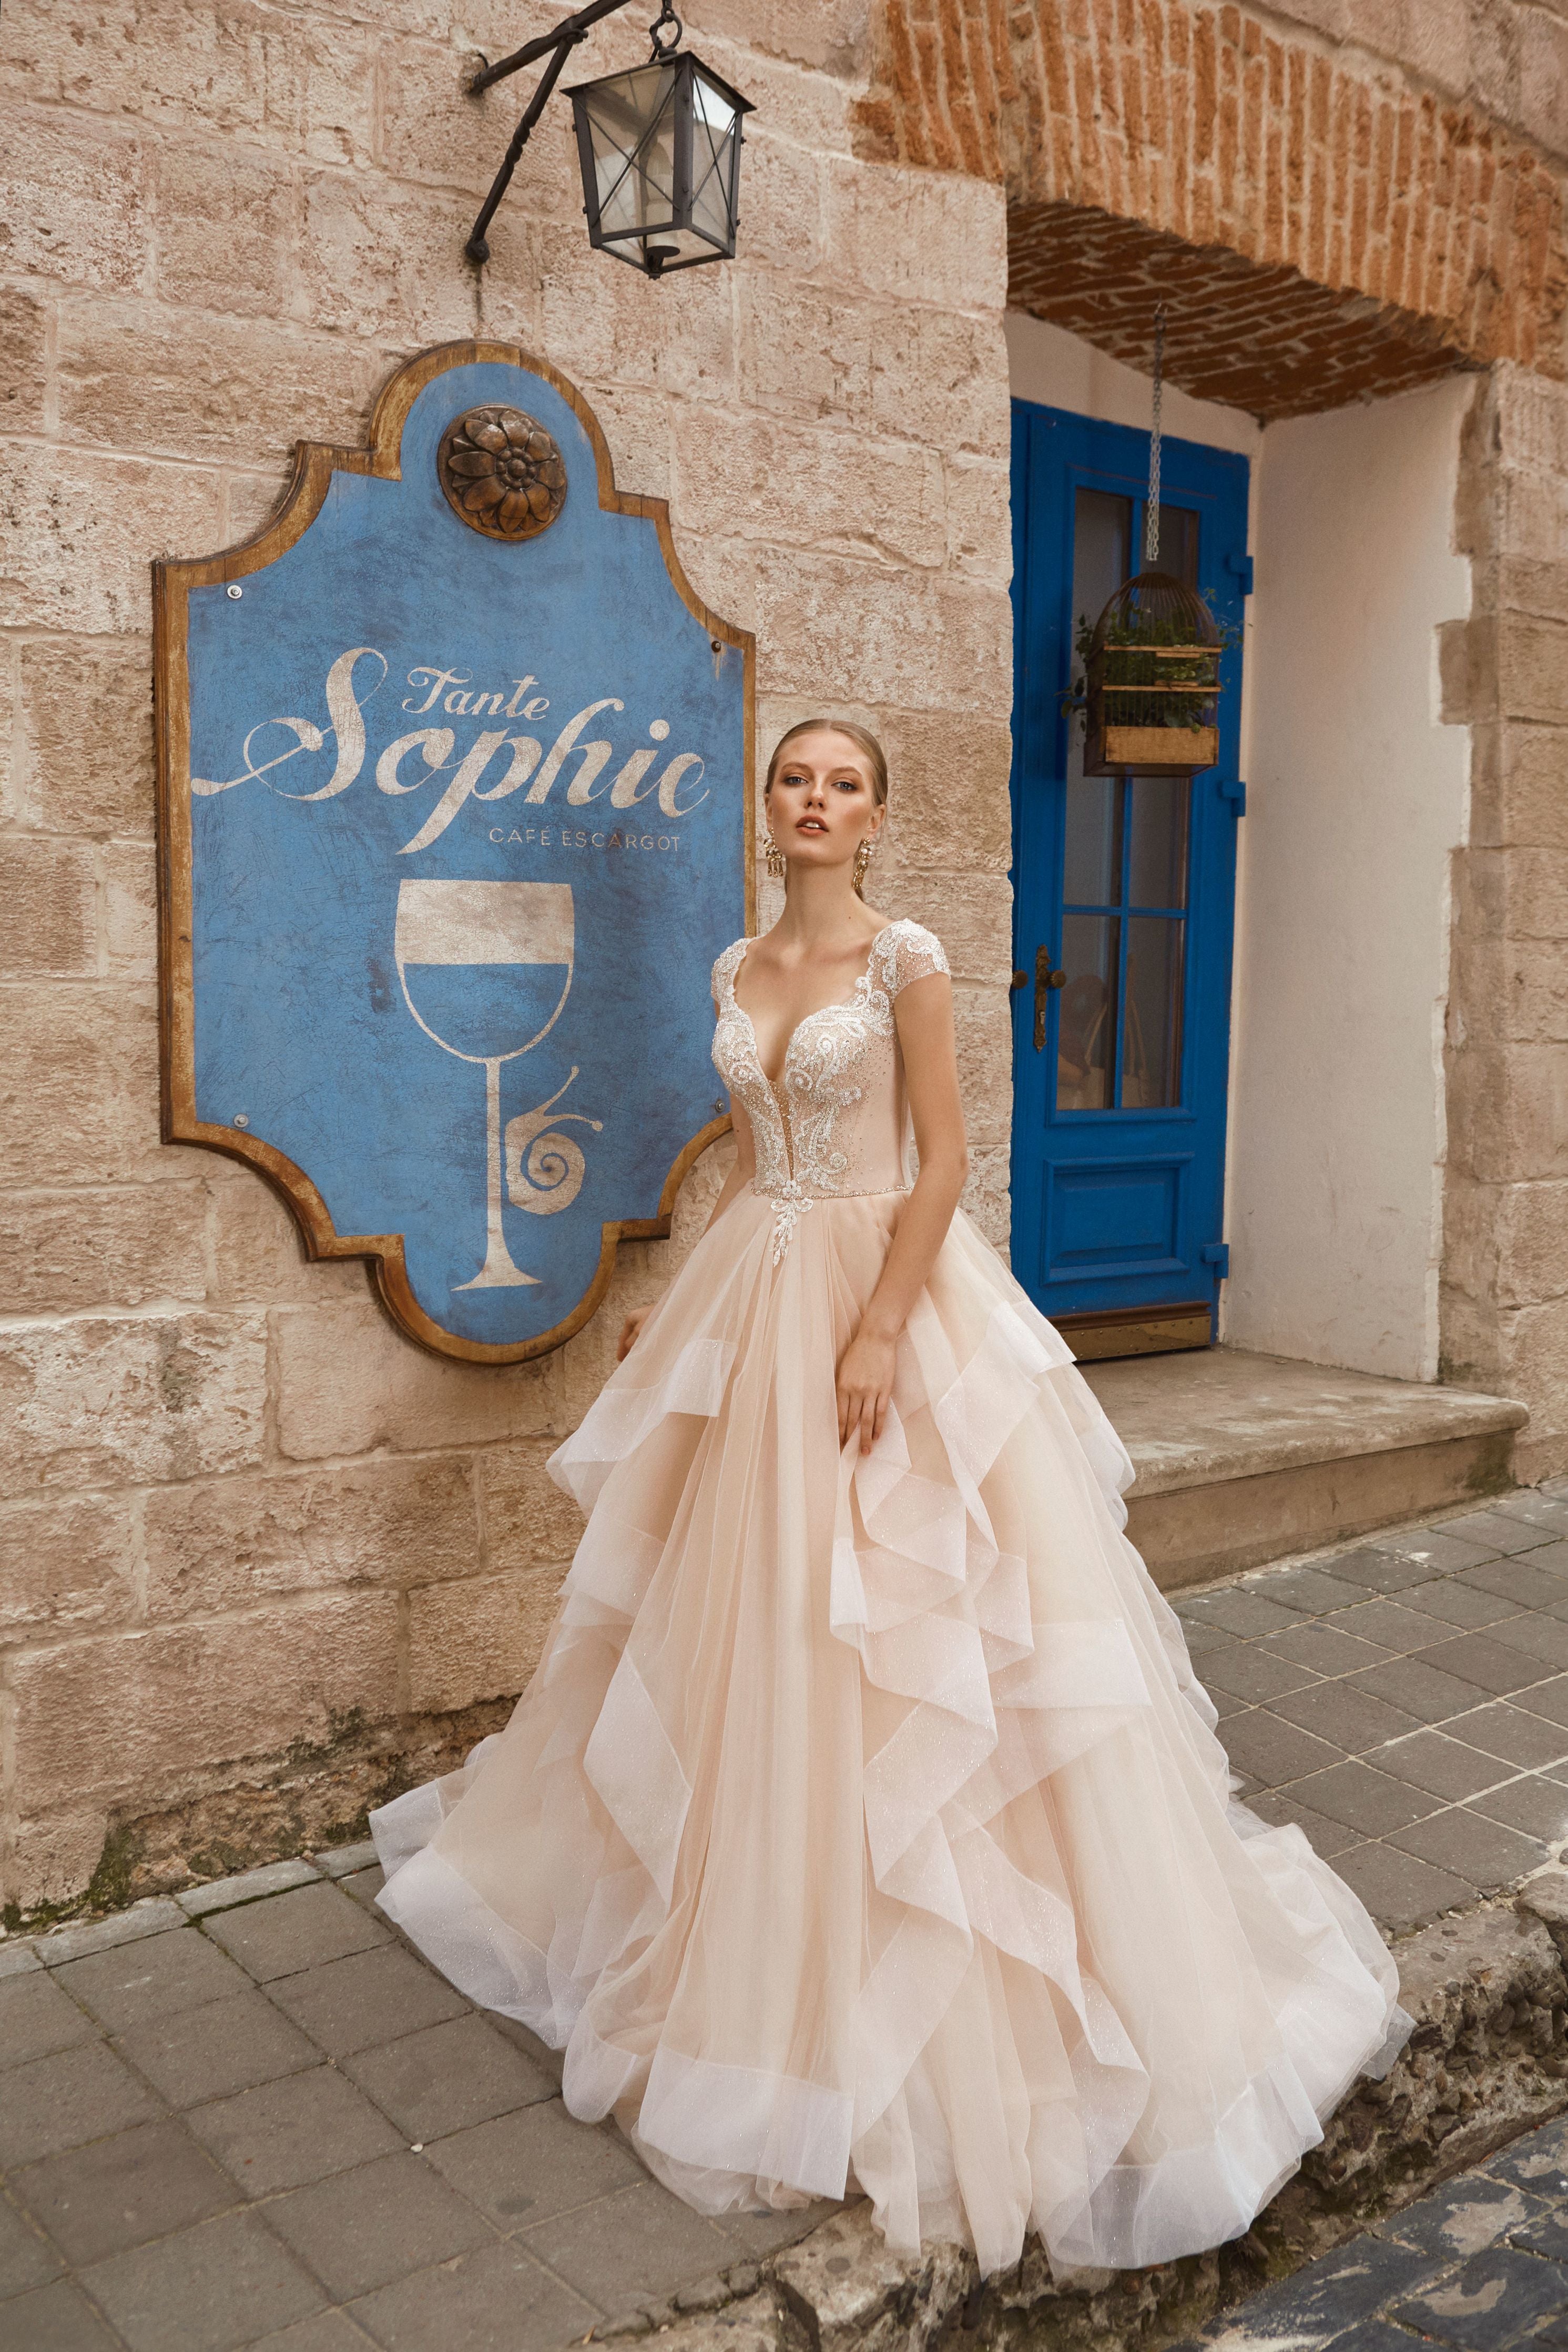 Sophie - Ruffled Skirt Ball Gown with Sweetheart Neckline